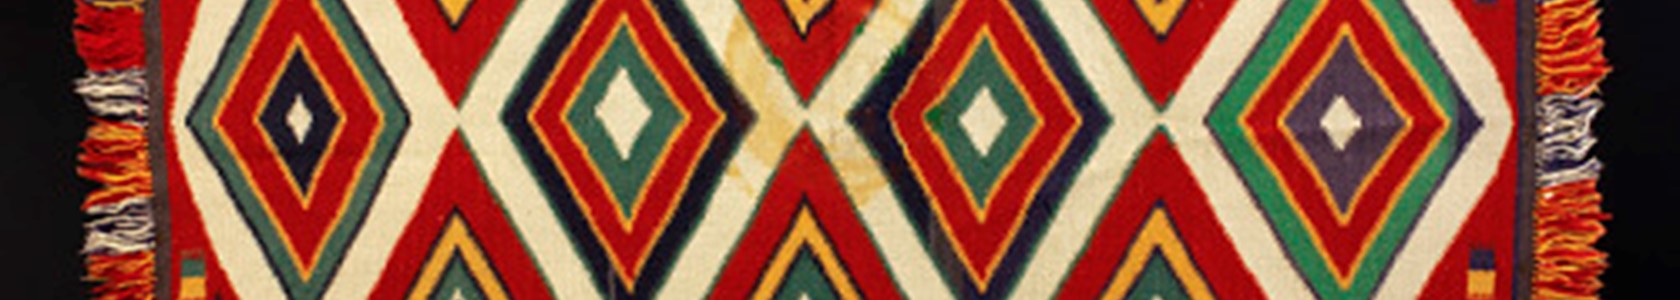 Detail of Double saddle blanket, circa 1880. National Museum of the American Indian, Smithsonian Institution. Cat. no. 15/9869.